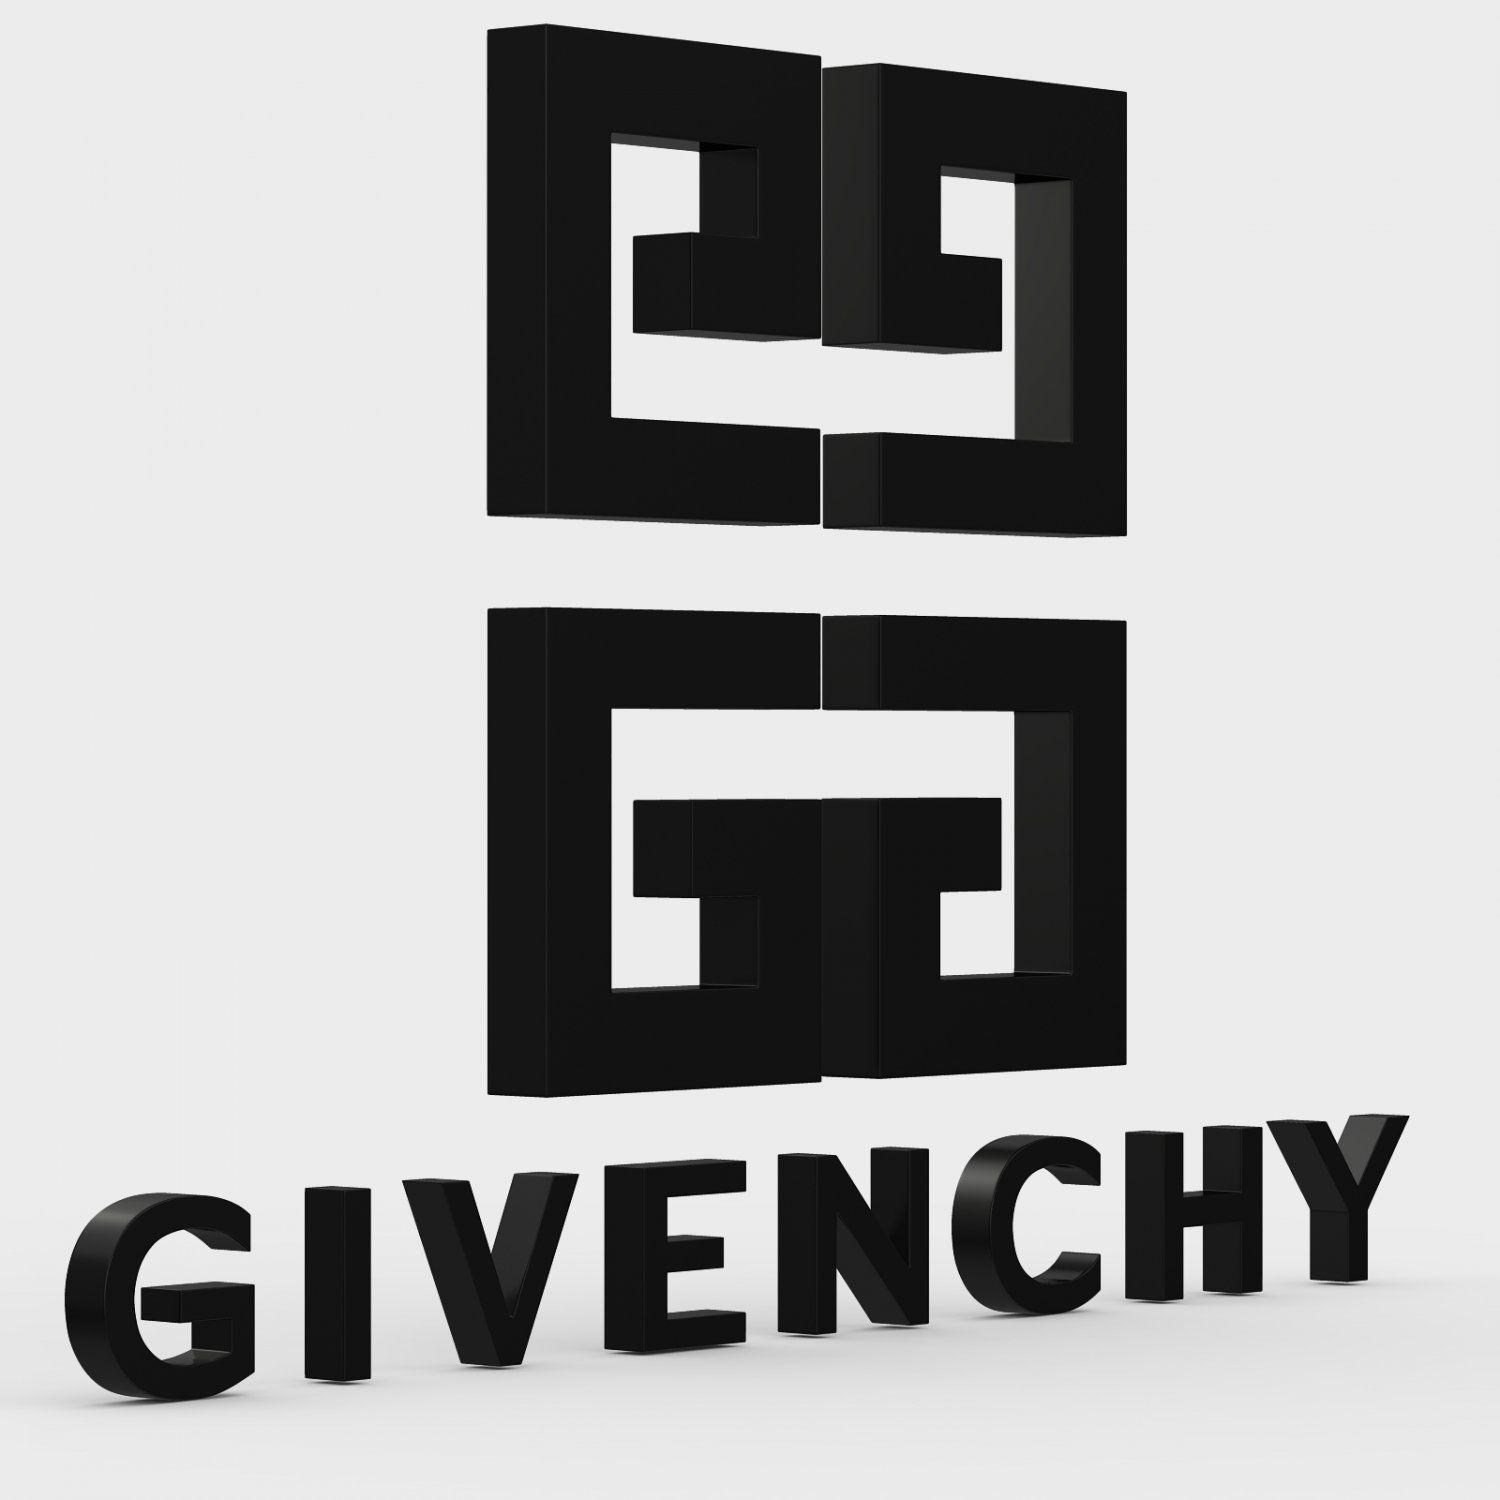 Givenchy Logo - Givenchy logo 3D Model in Other 3DExport